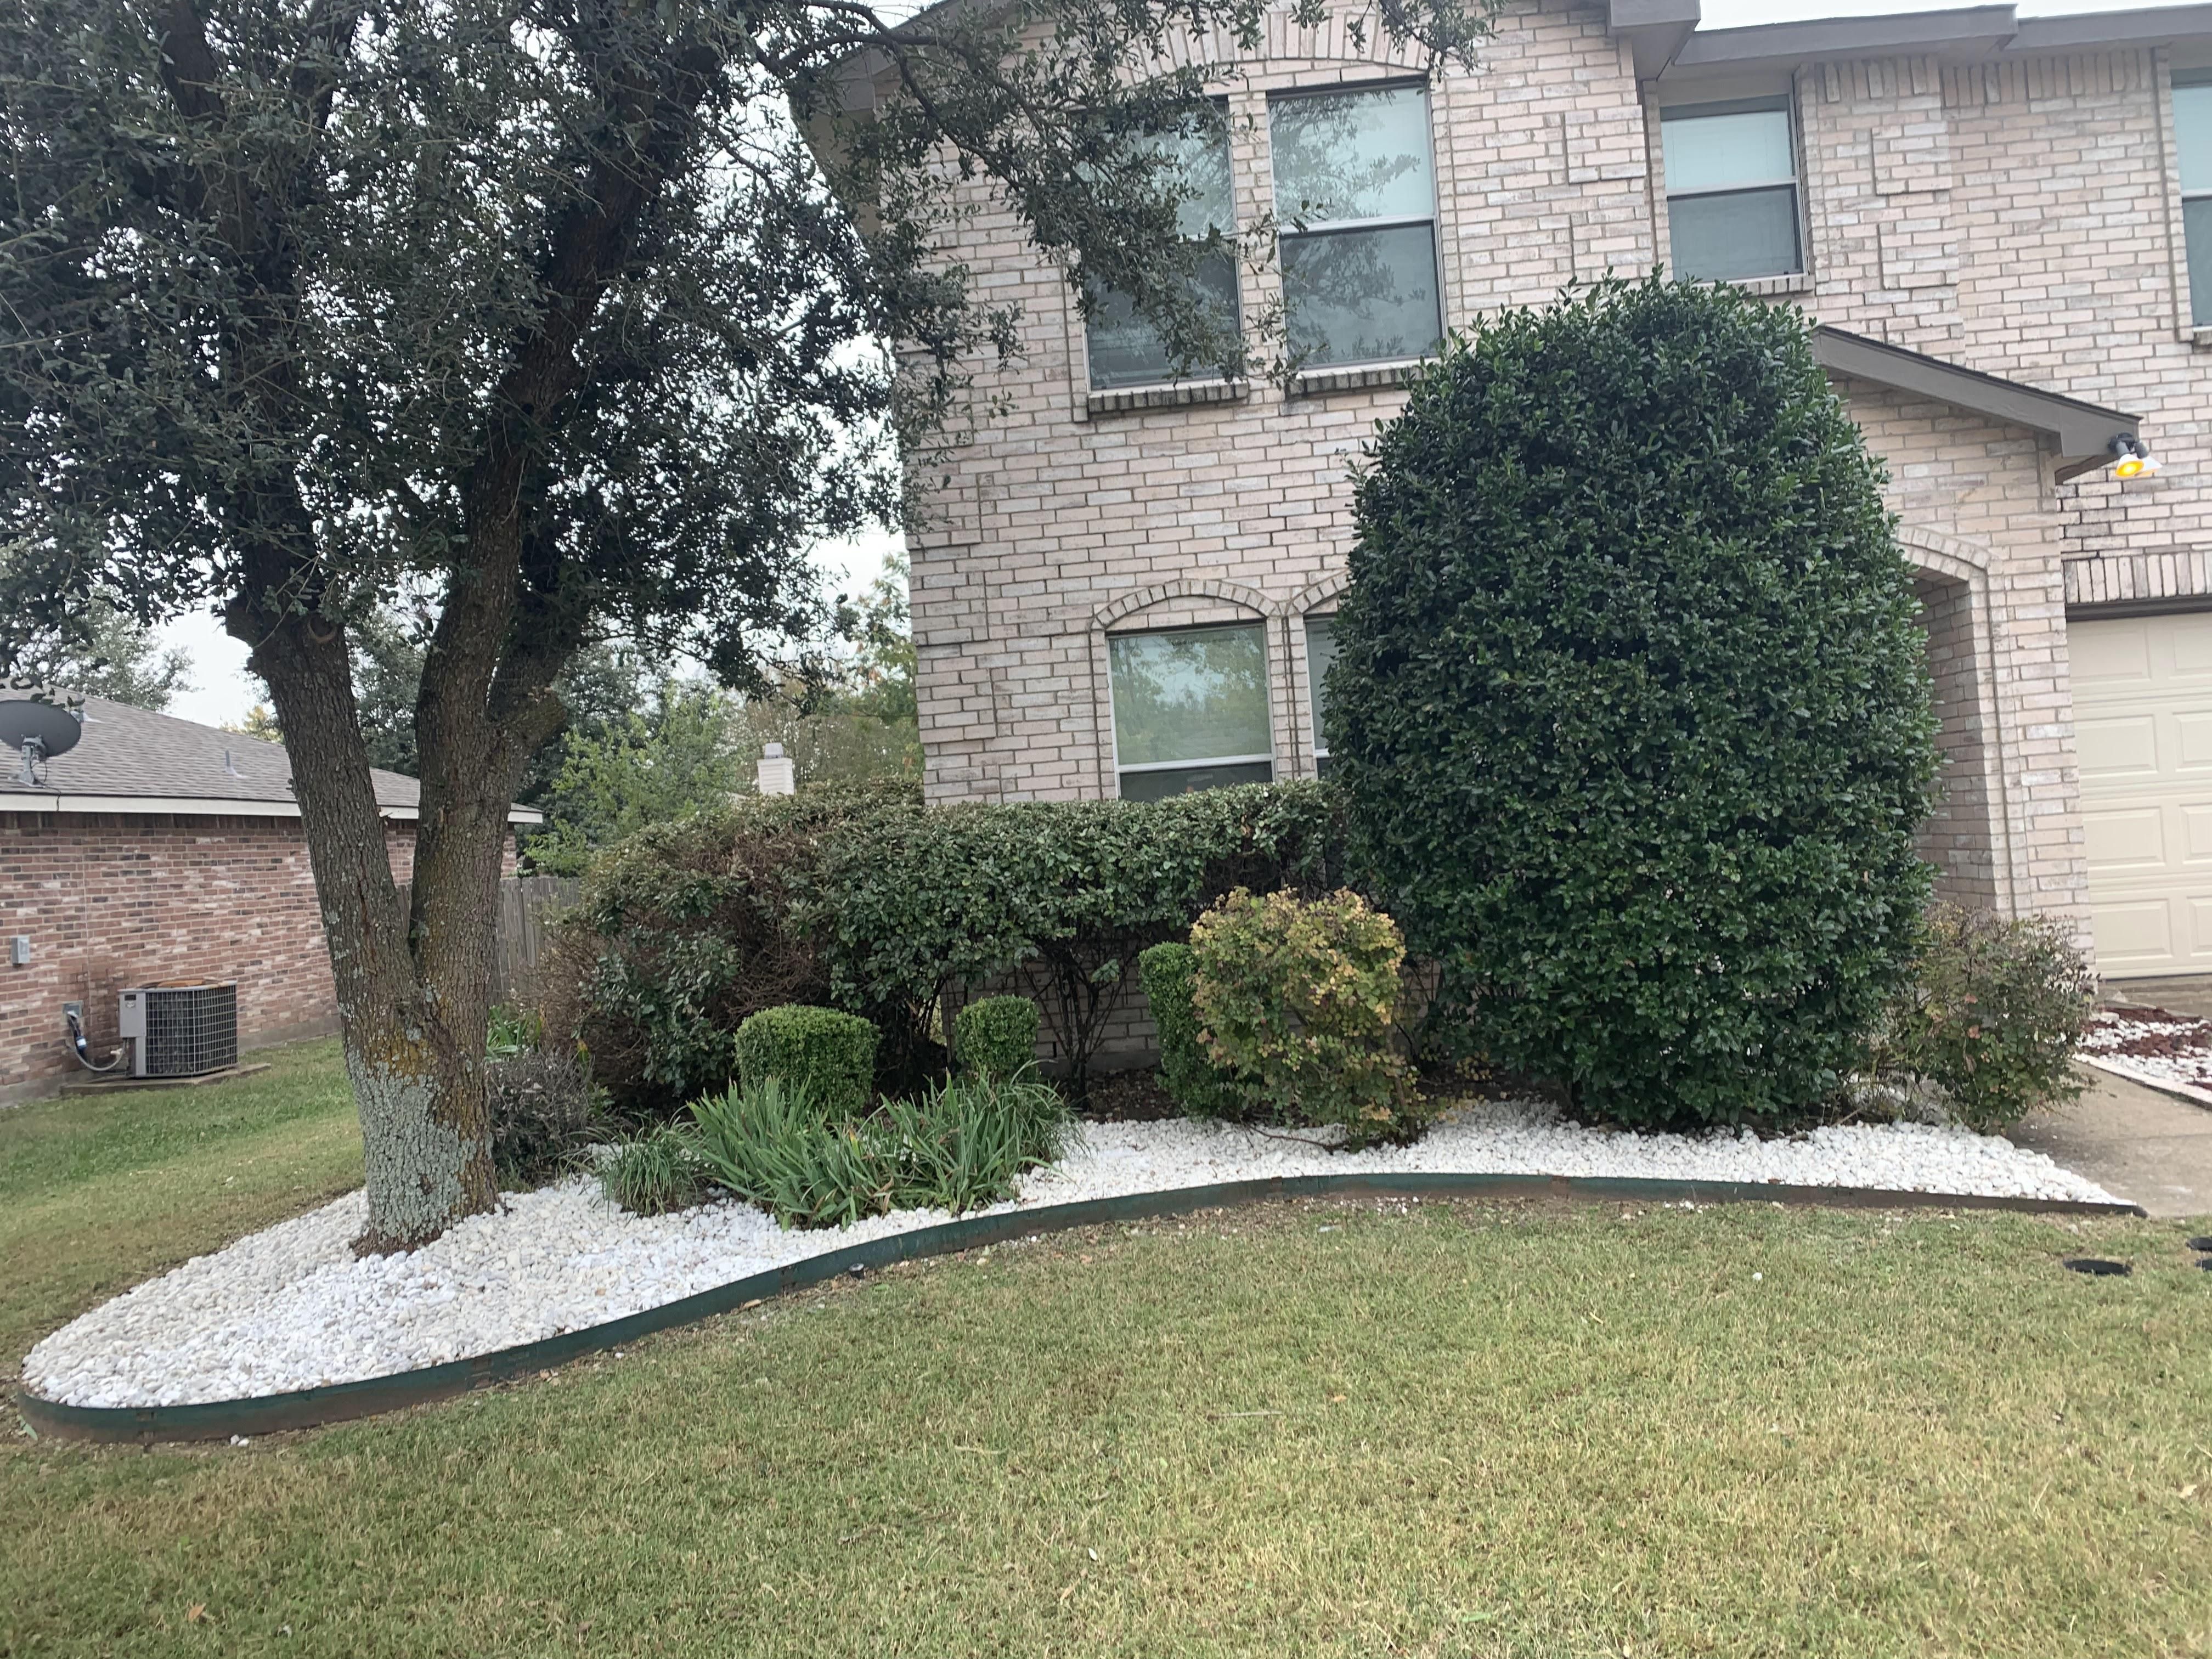 All Photos for Grass Kickers Lawn Care and Landscaping in Dallas, TX